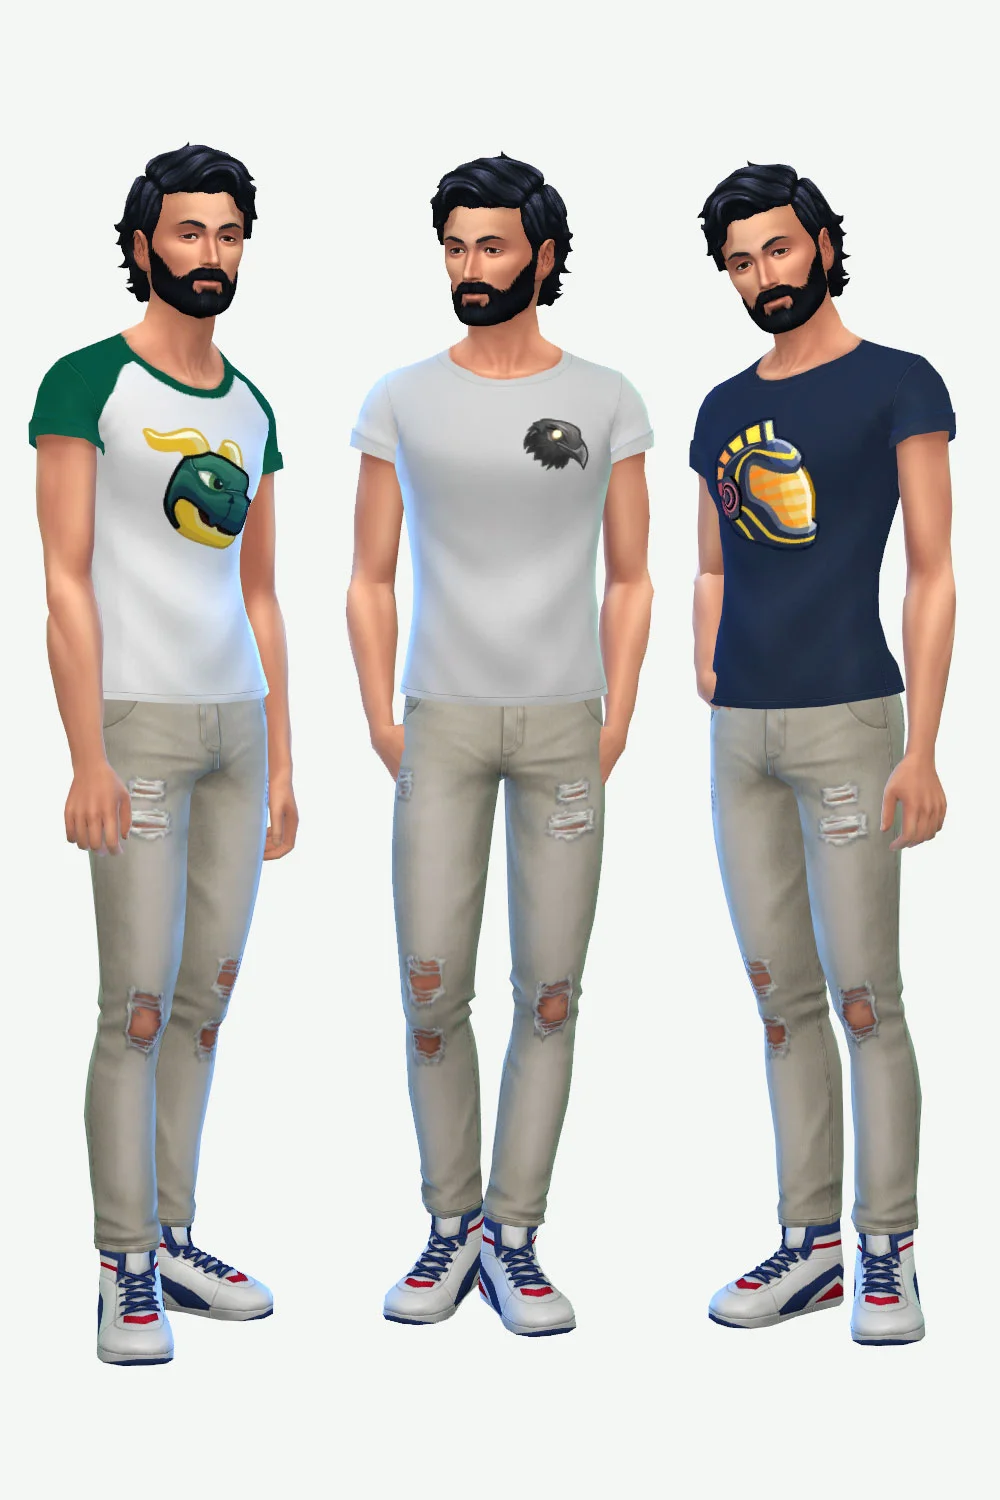 The Sims 4 Male T-Shirt